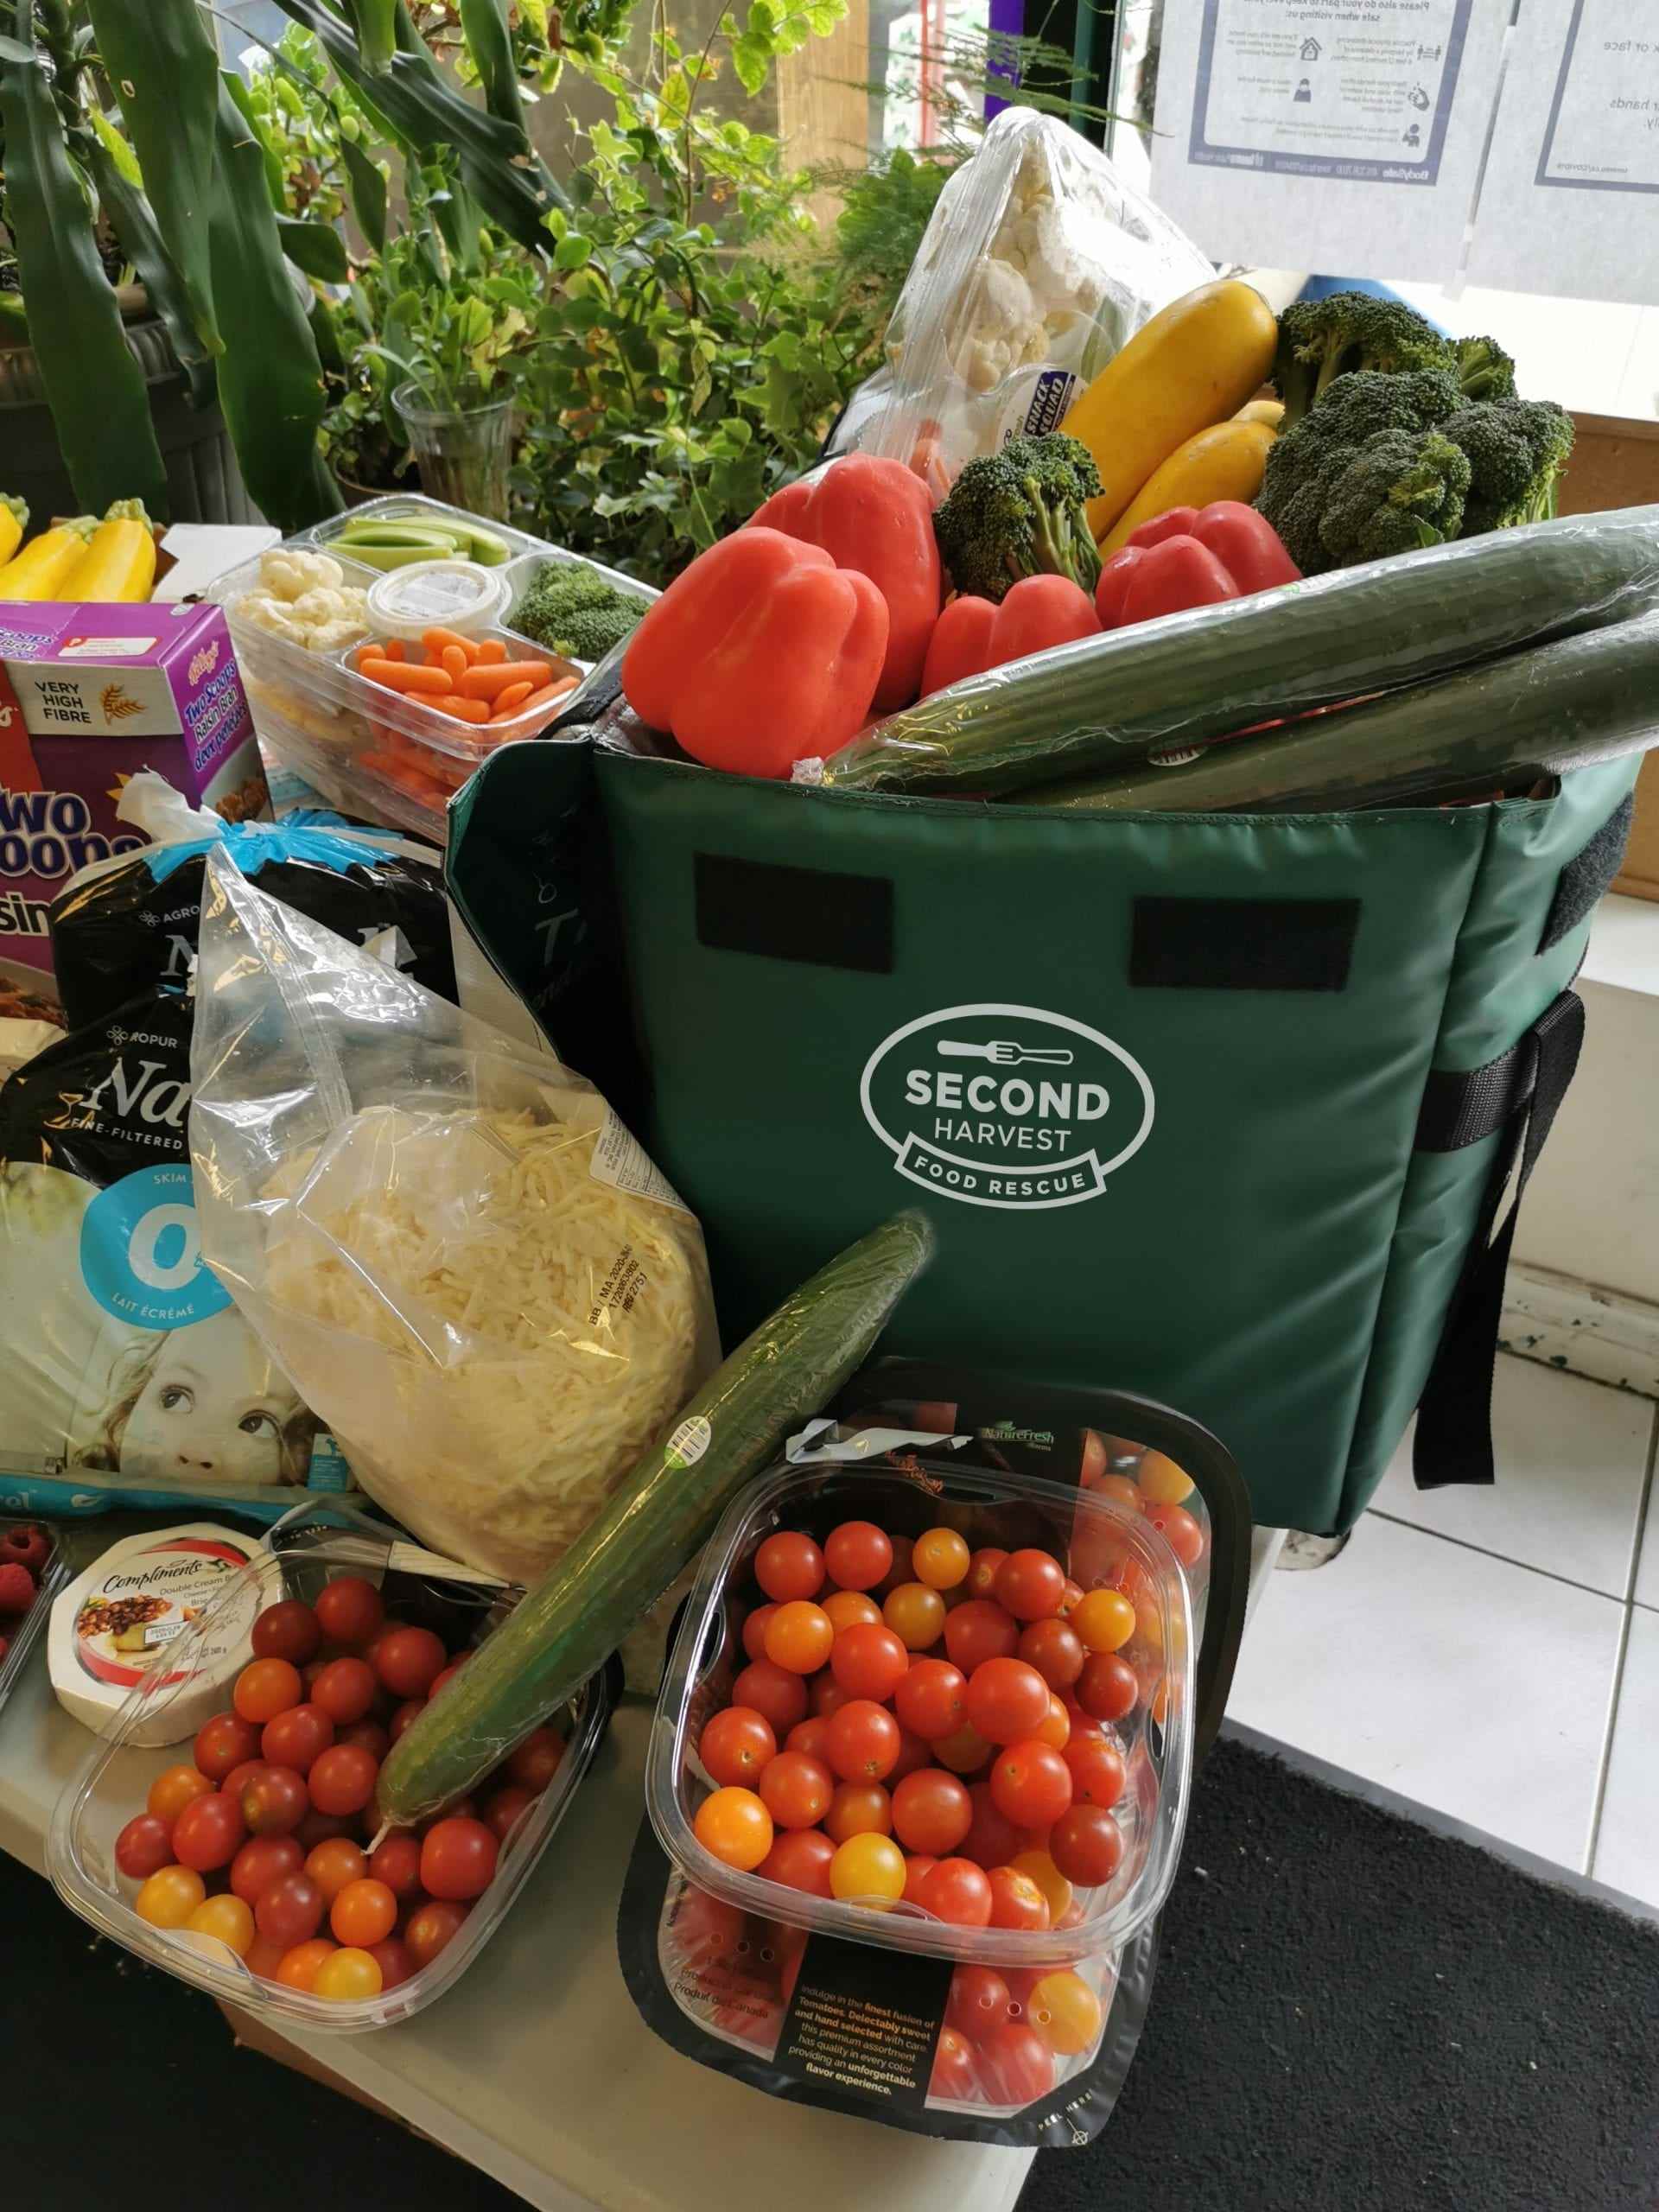 Groceries on table and inside Second Harvest Food Rescue cooler bag